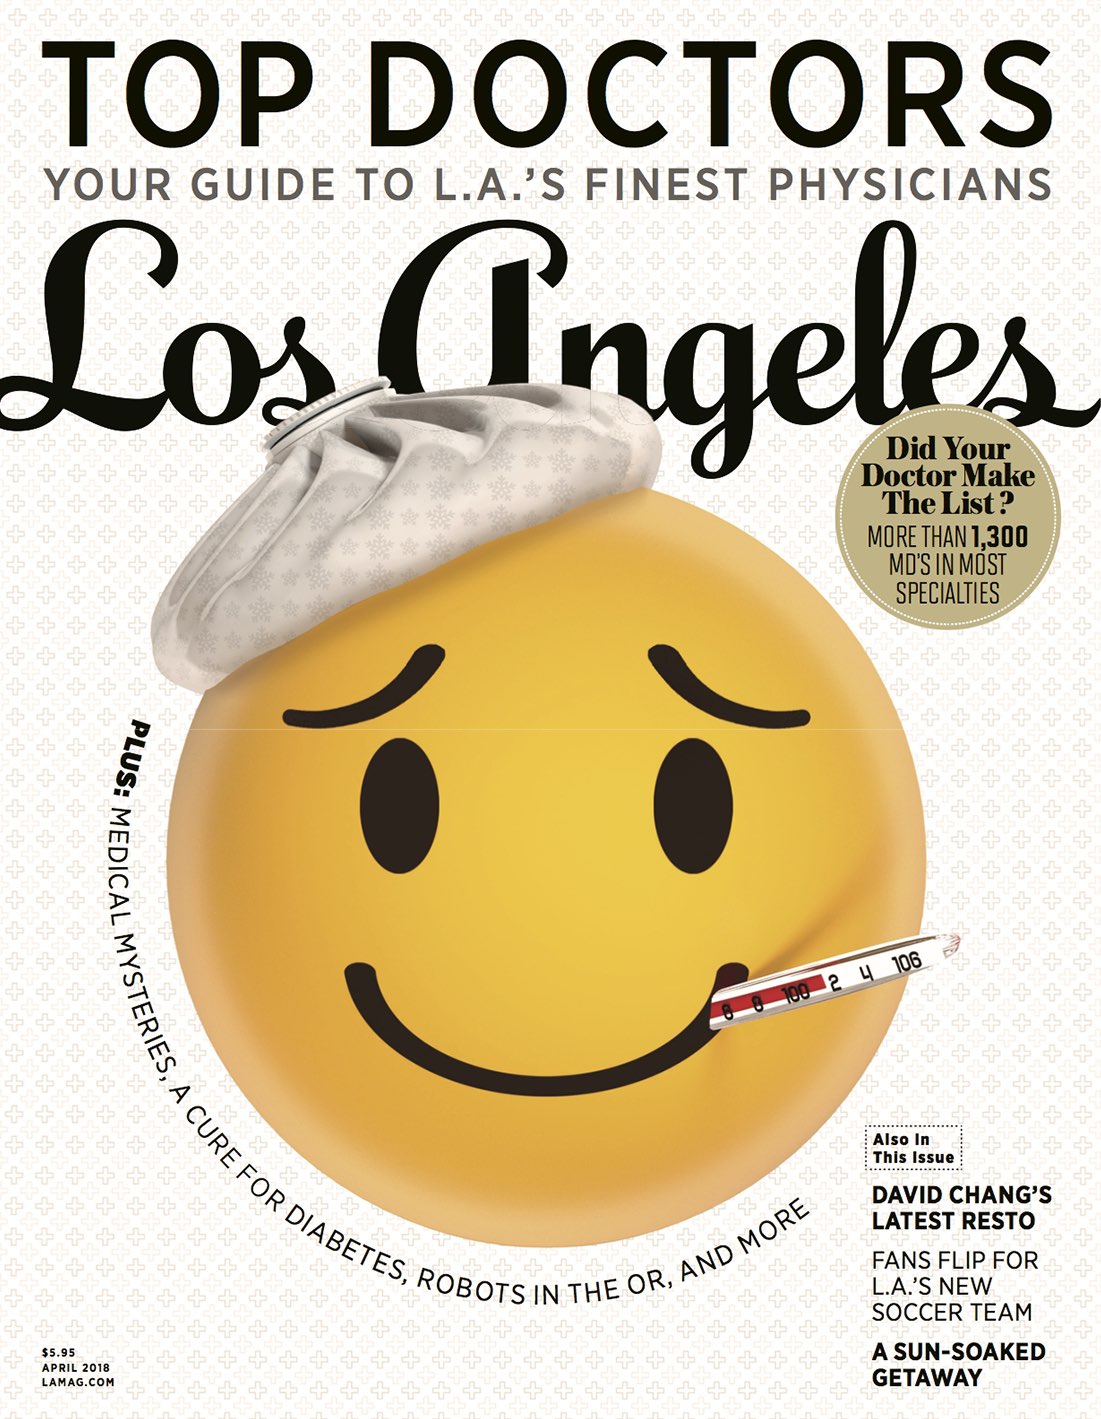 Recently Ranked A Top Doctor by Los Angeles Magazine